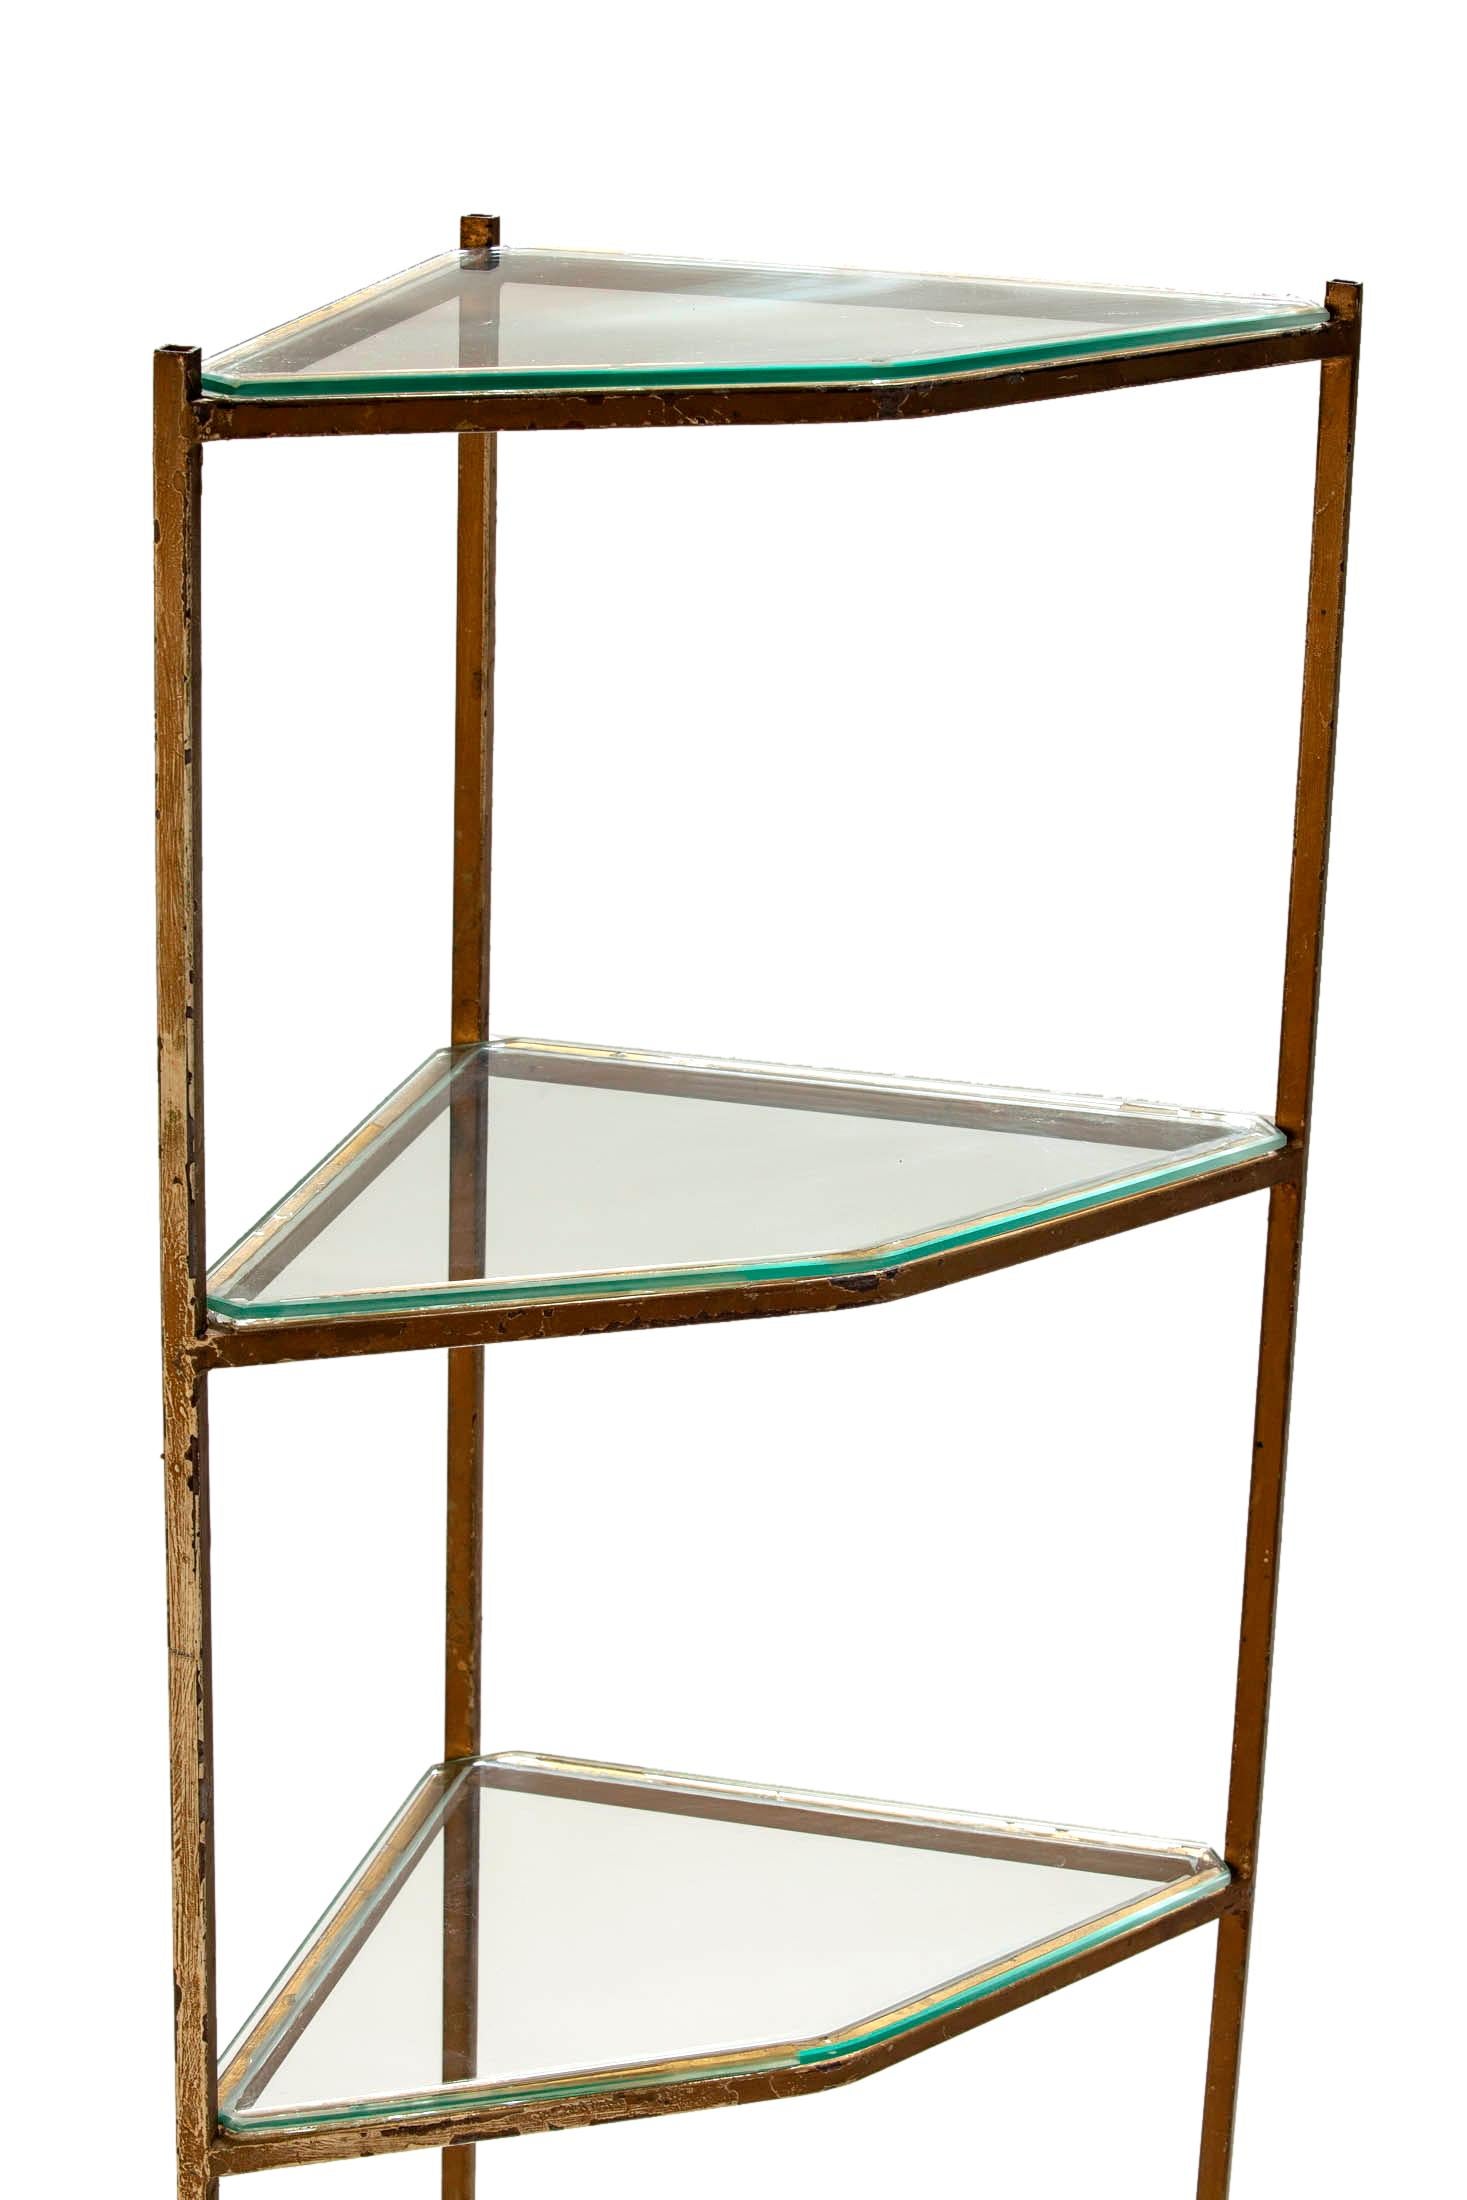 Forged Mid-century Iron & Glass Etagere